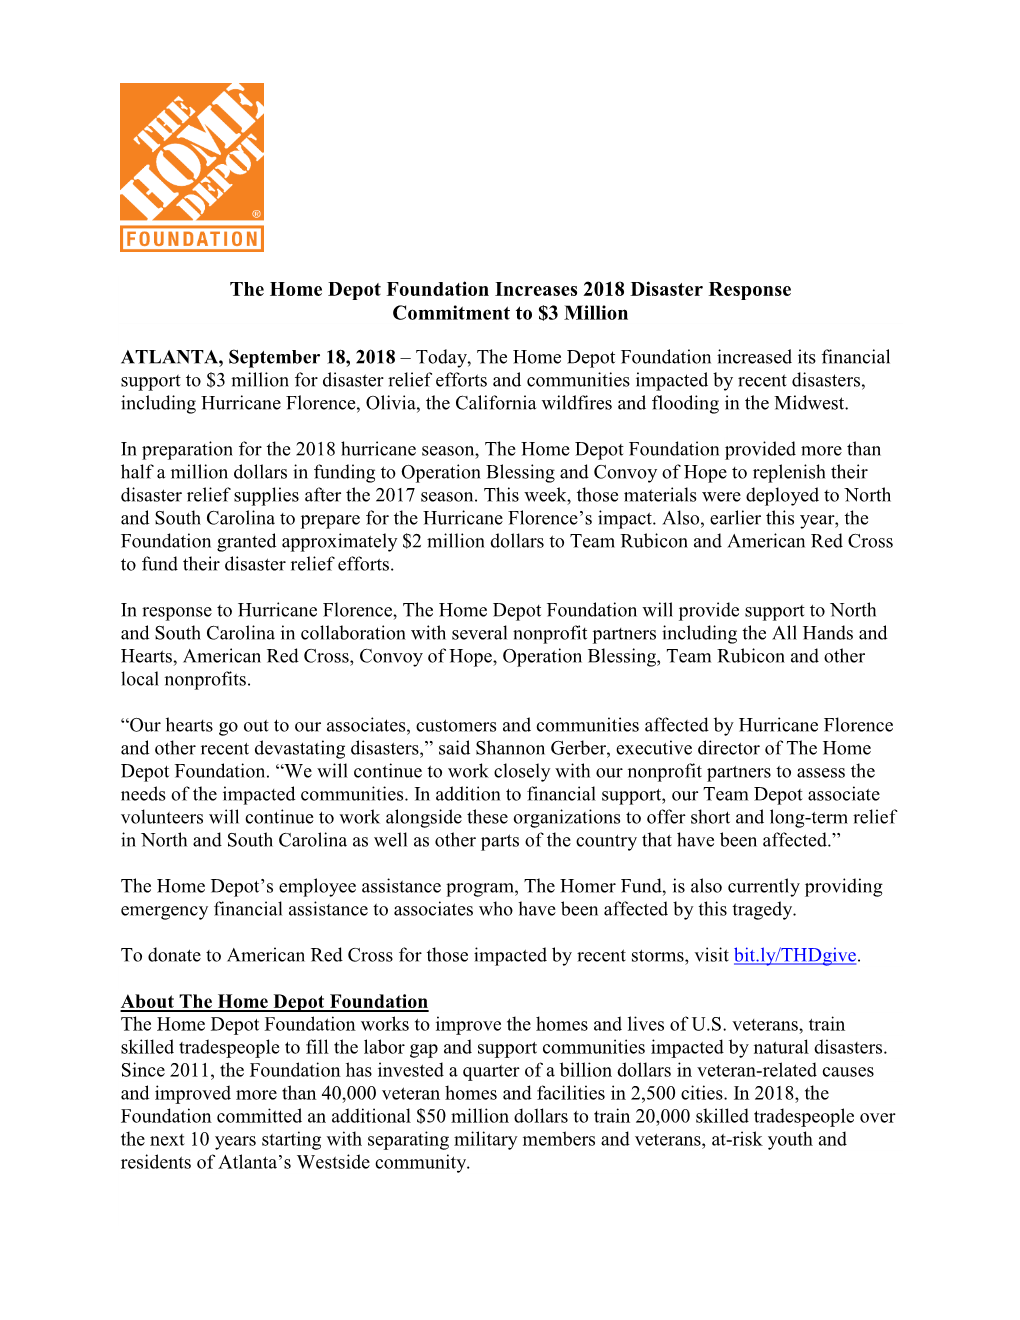 The Home Depot Foundation Increases 2018 Disaster Response Commitment to $3 Million ATLANTA, September 18, 2018 – Today